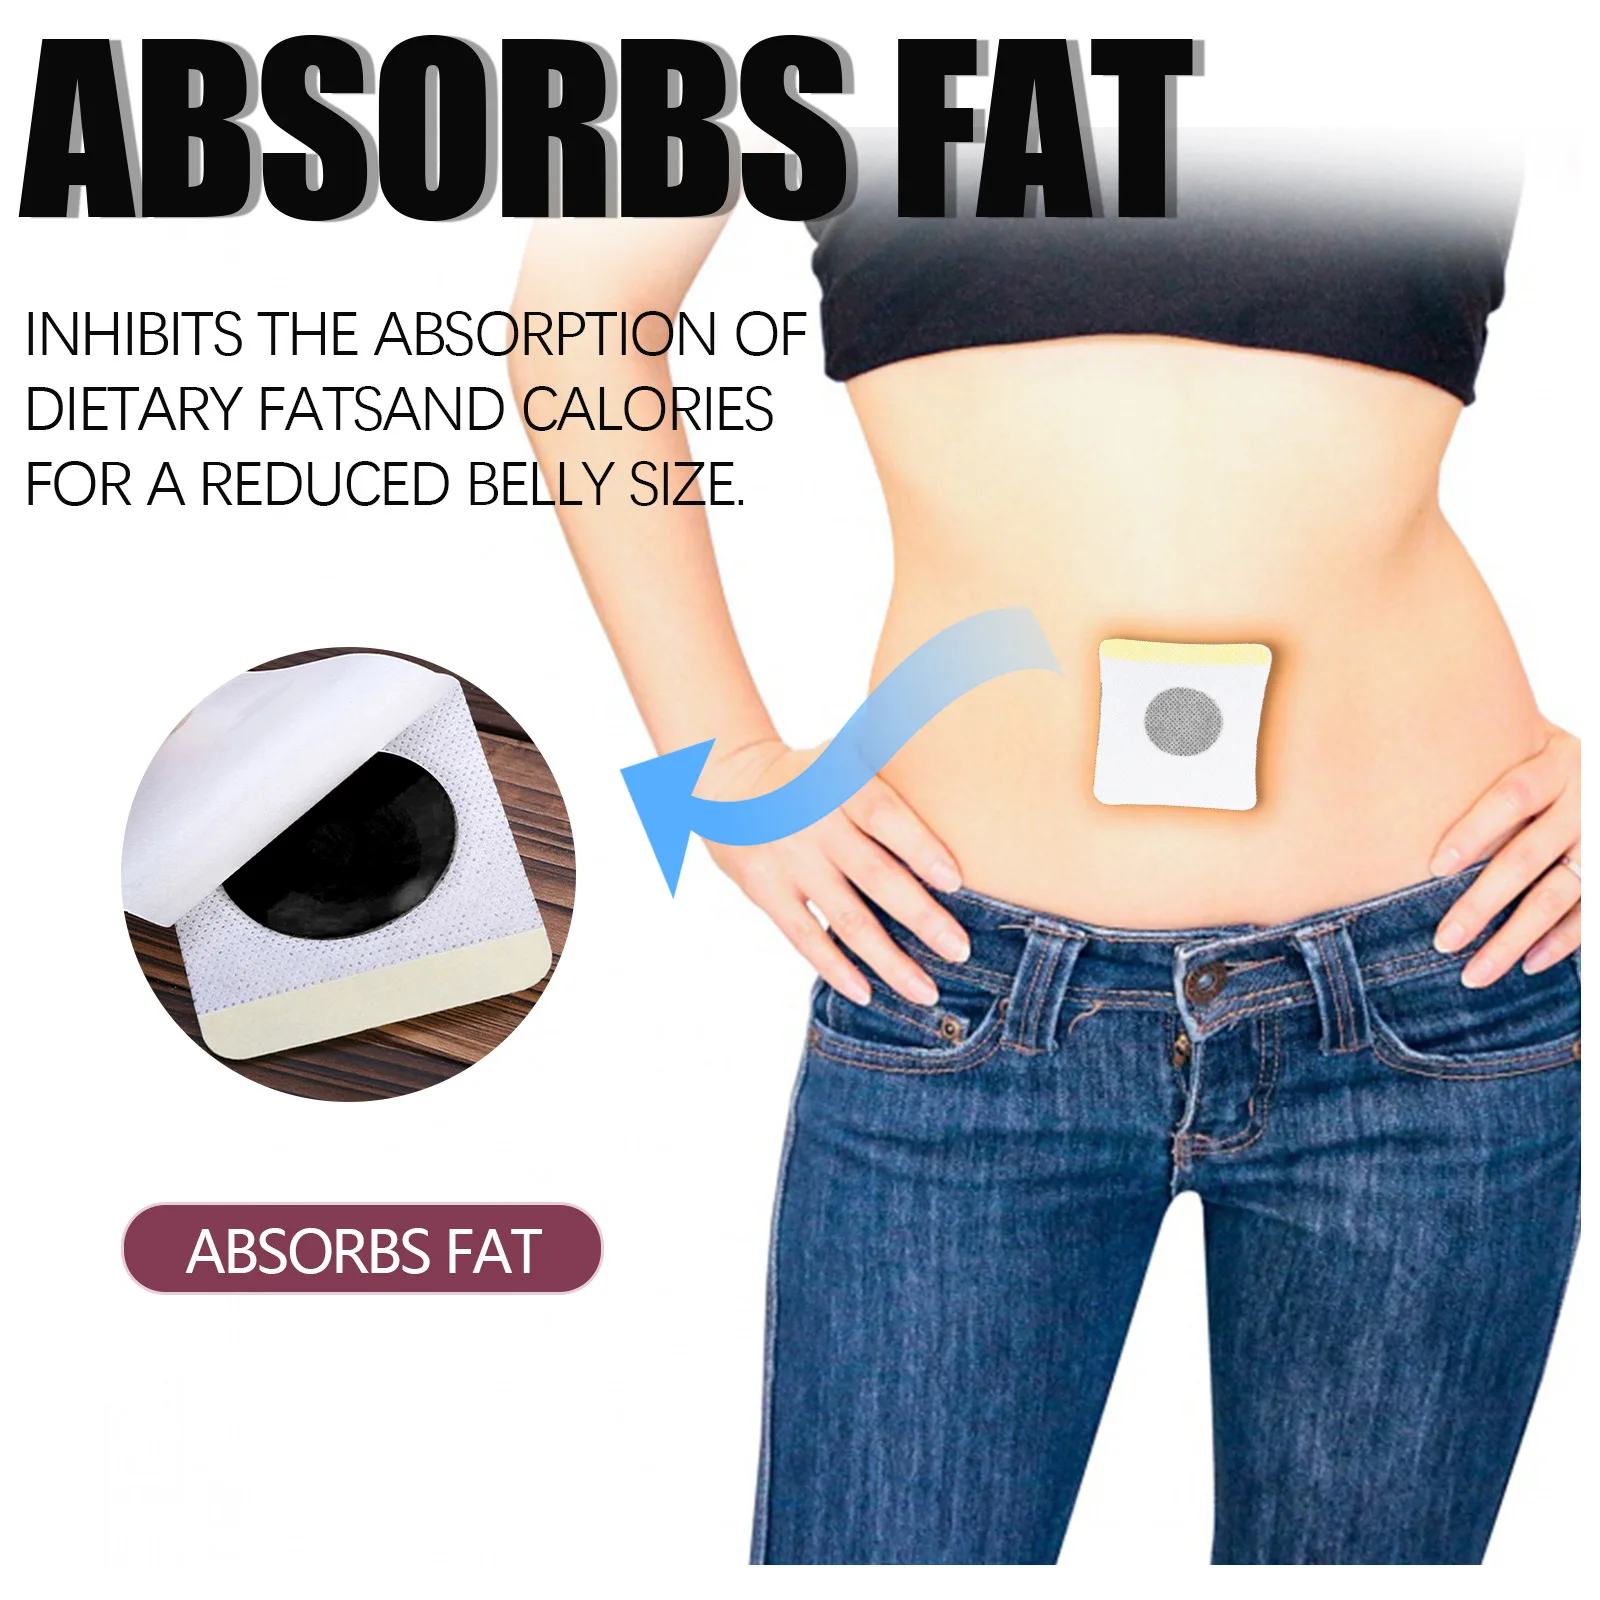 Weight Loss Slim Patch Navel Sticker Fat Burning Slimming Products Body Belly Waist Losing Weight Cellulite Fat Burner Sticker